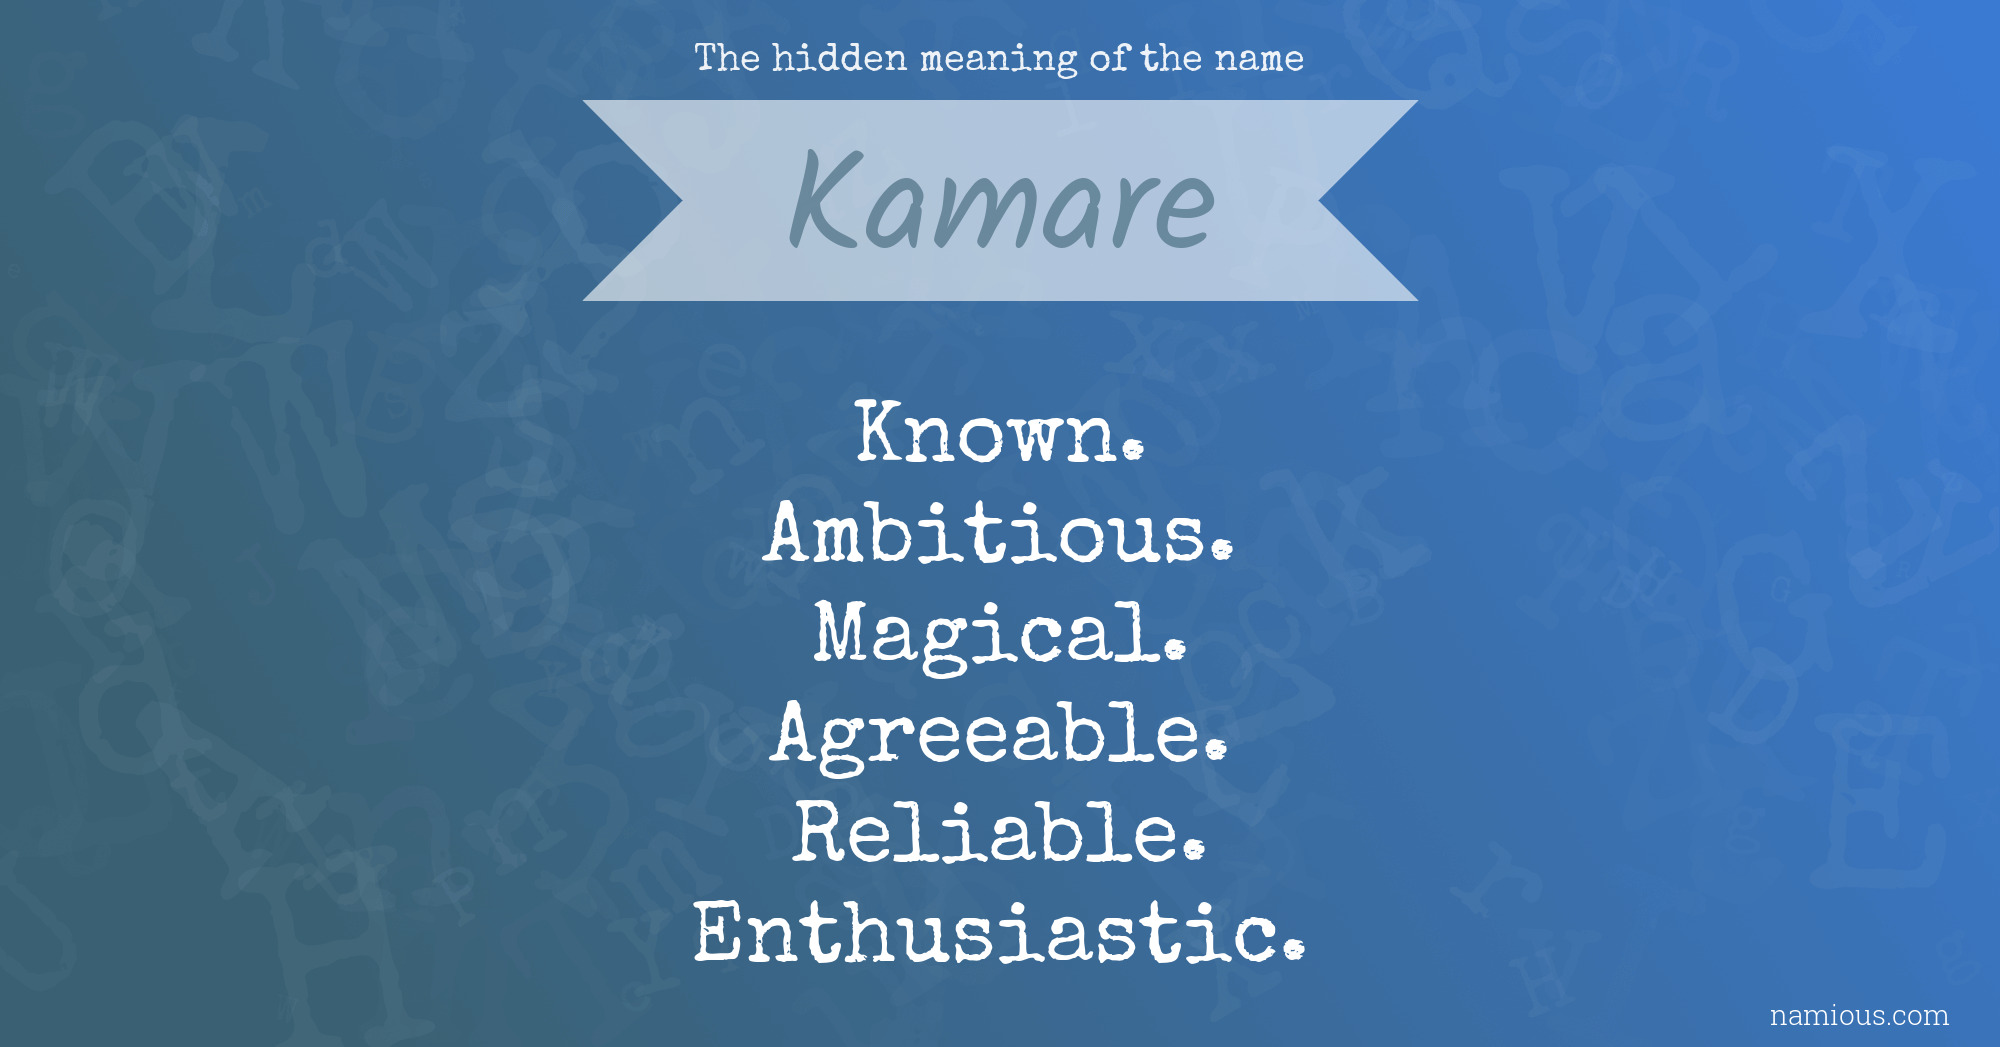 The hidden meaning of the name Kamare